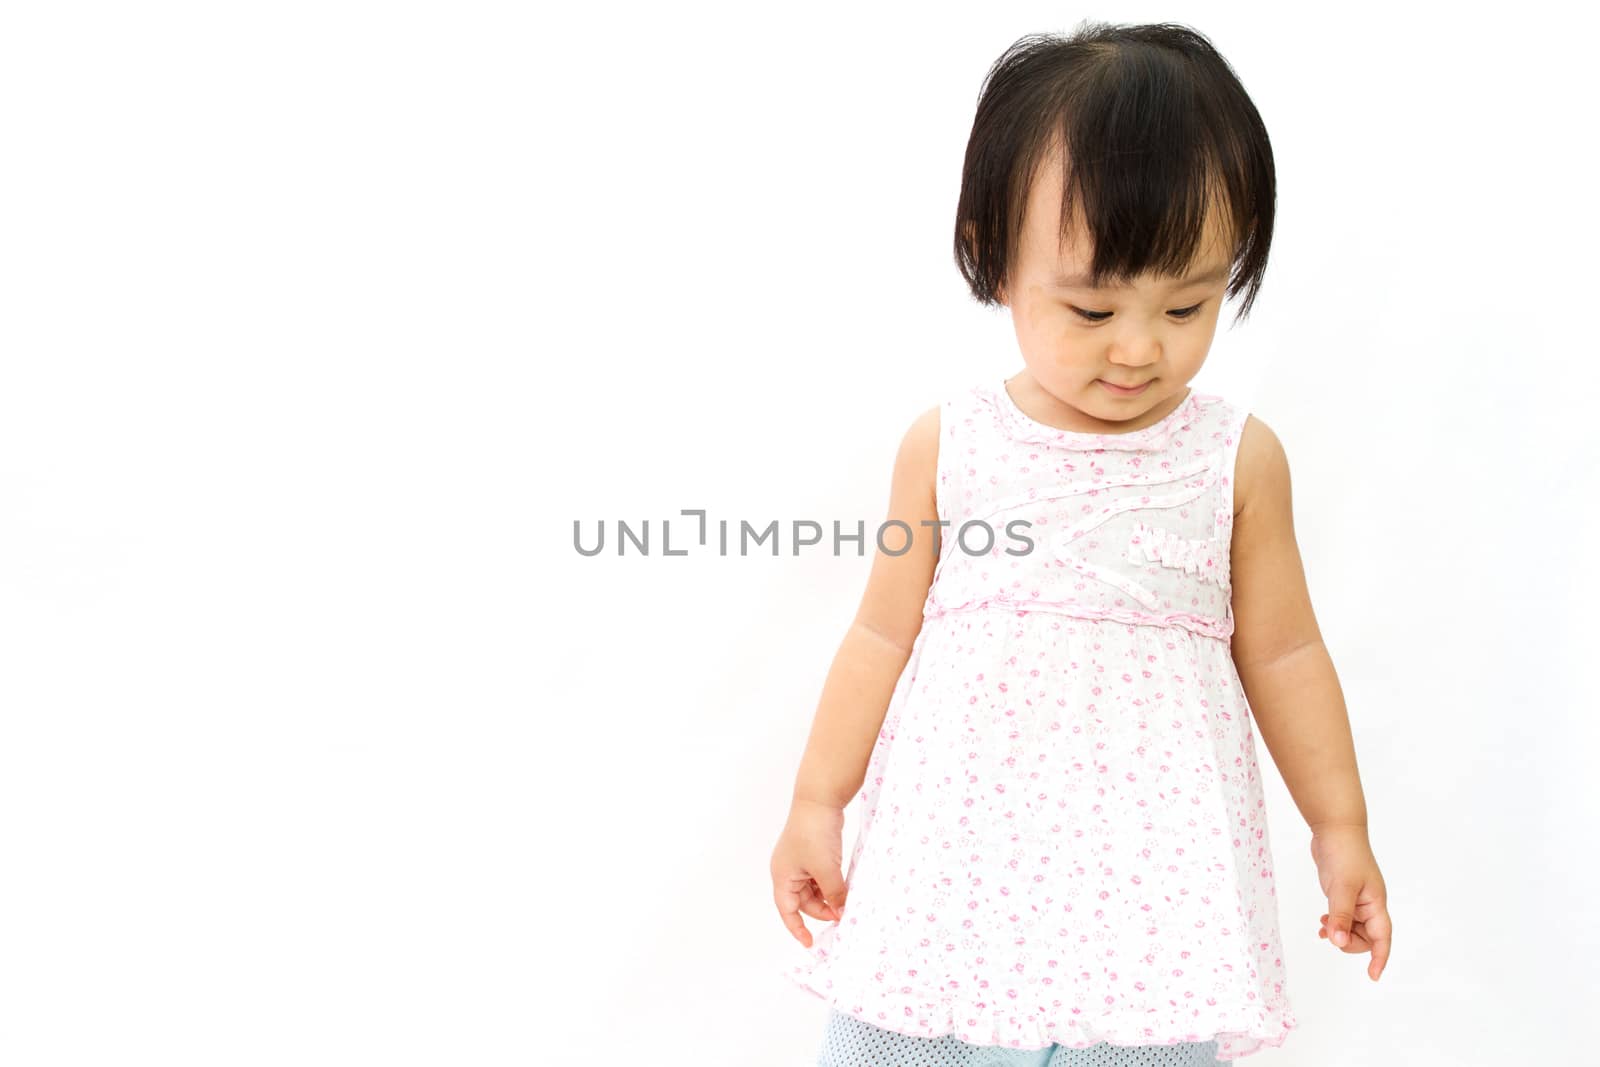 Chinese Little Girl looks down for a portrait in studio on plain white isolated background.